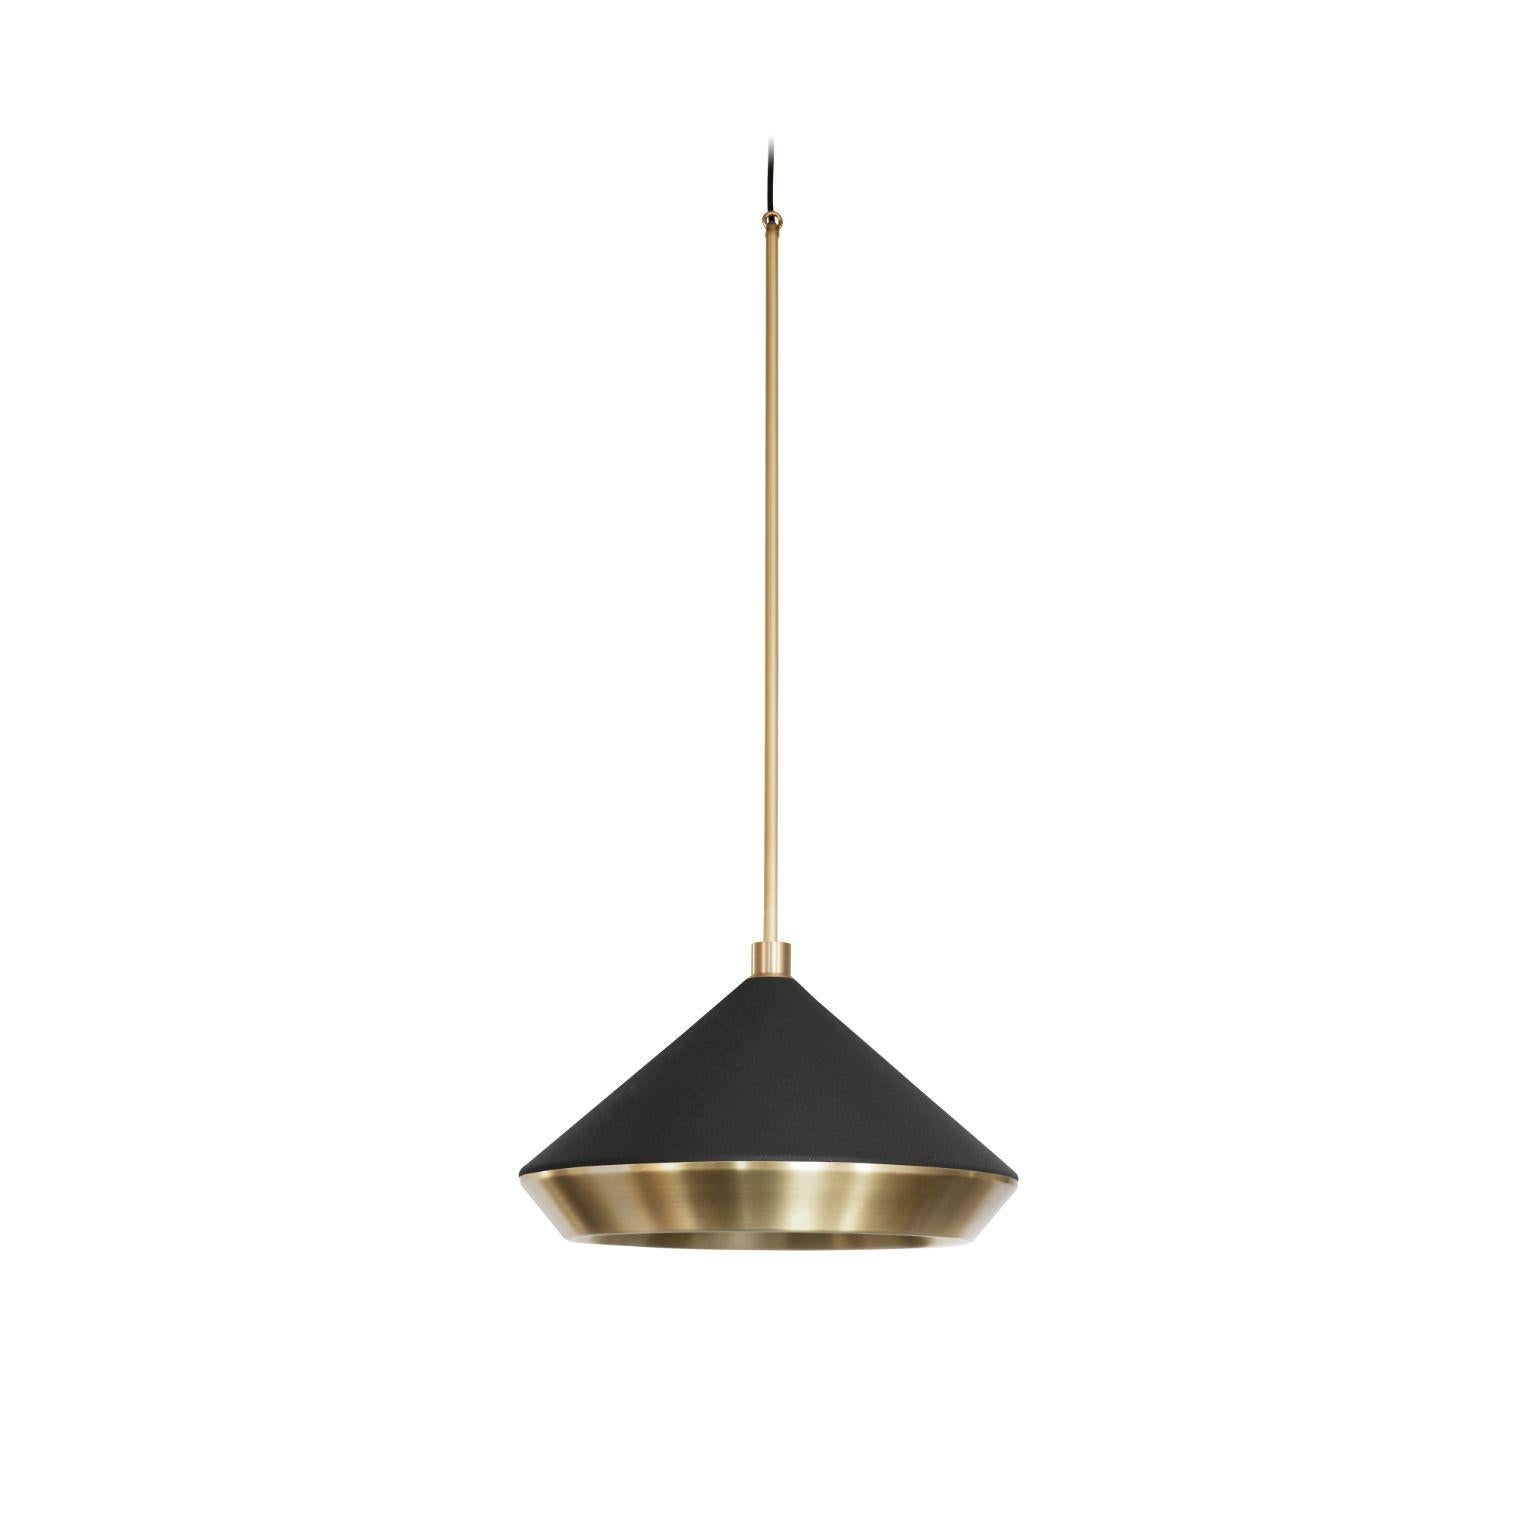 Shear pendant light XL- brass - black by Bert Frank
Dimensions: 30 x 50 cm
Materials: Brass

When Adam Yeats and Robbie Llewellyn founded Bert Frank in 2013 it was a meeting of minds and the start of a collaborative creative partnership with